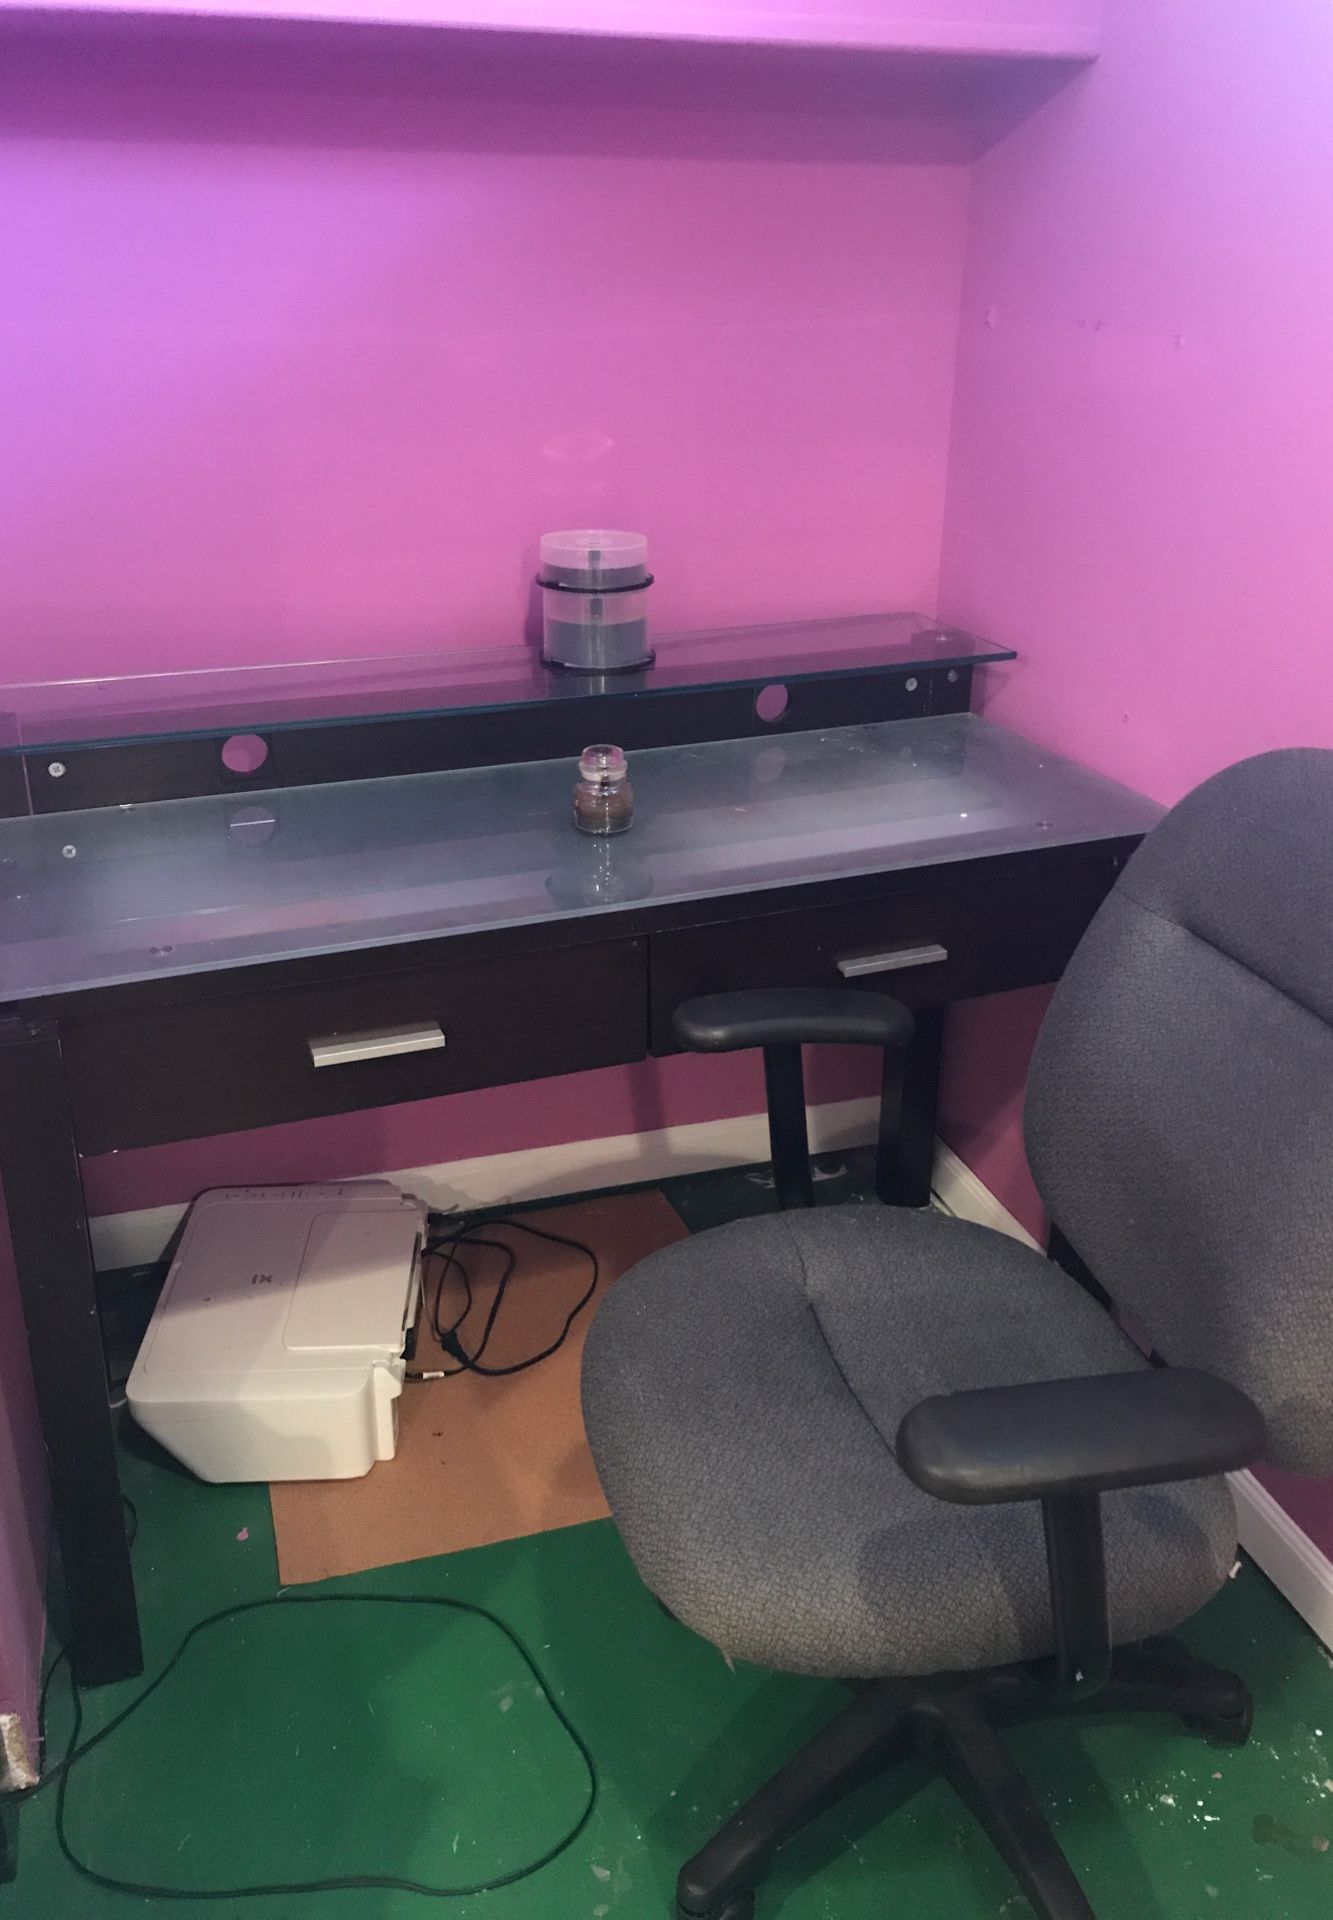 Desk and chair